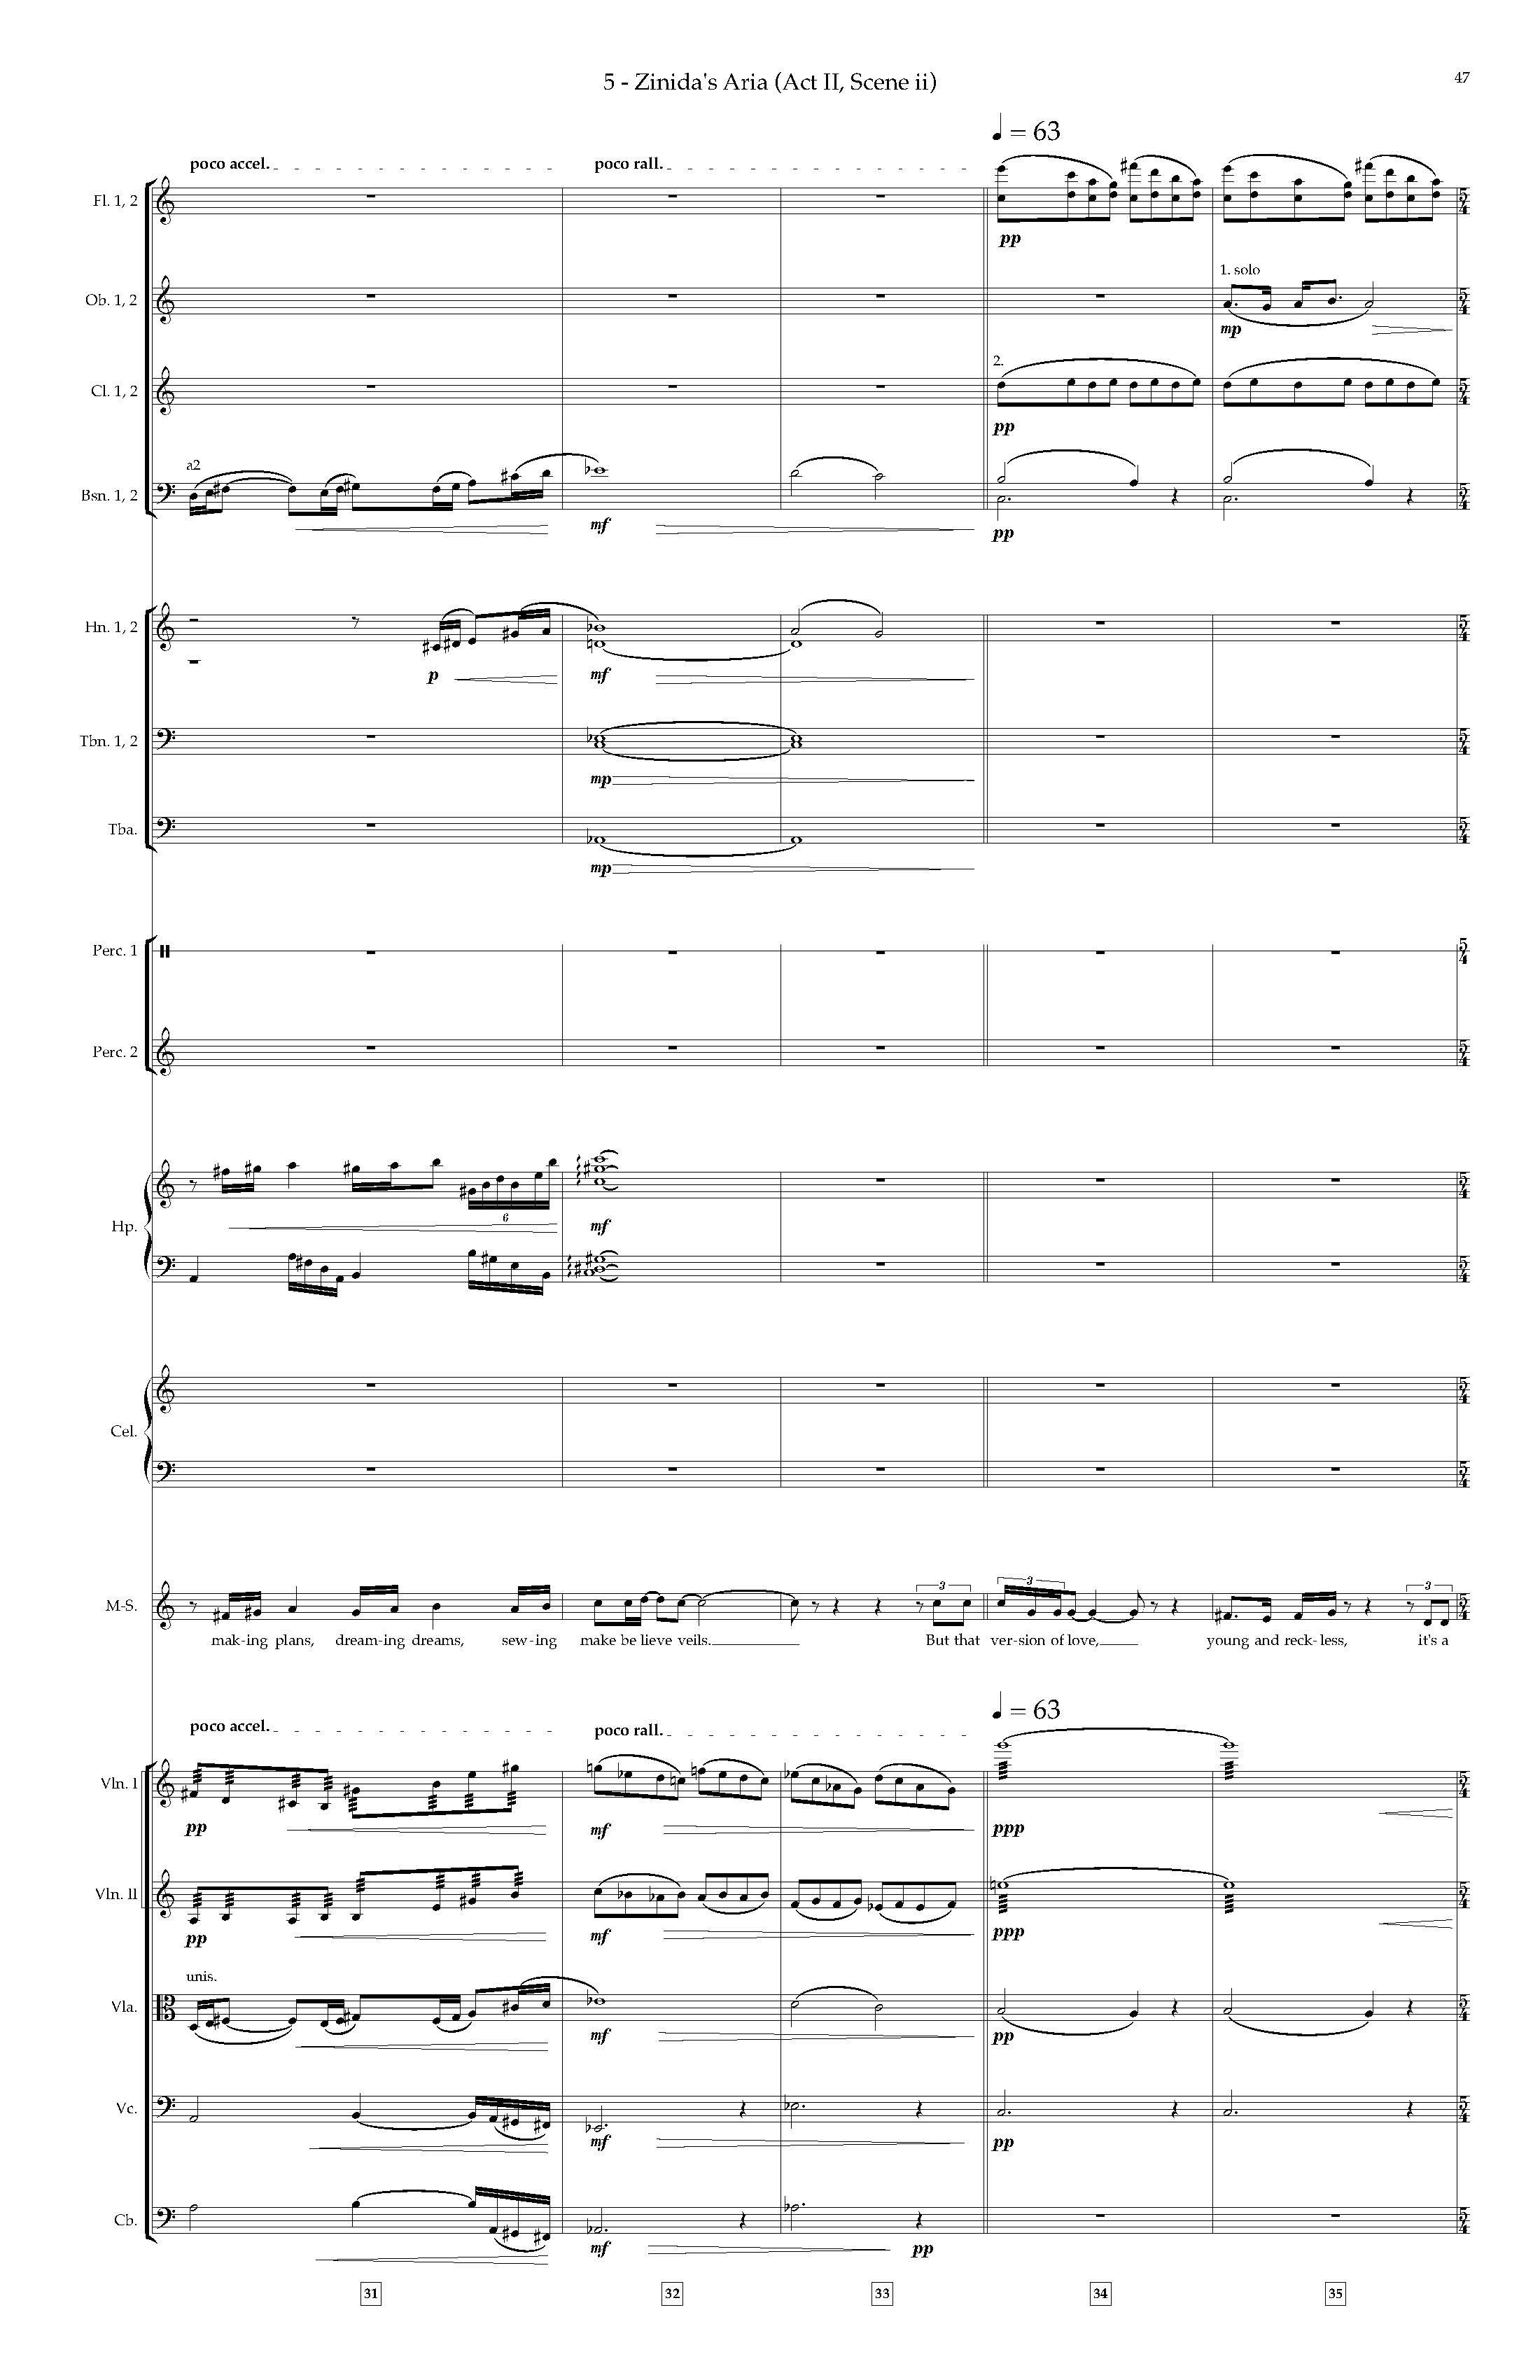 Arias and Interludes from HWGS - Complete Score_Page_53.jpg